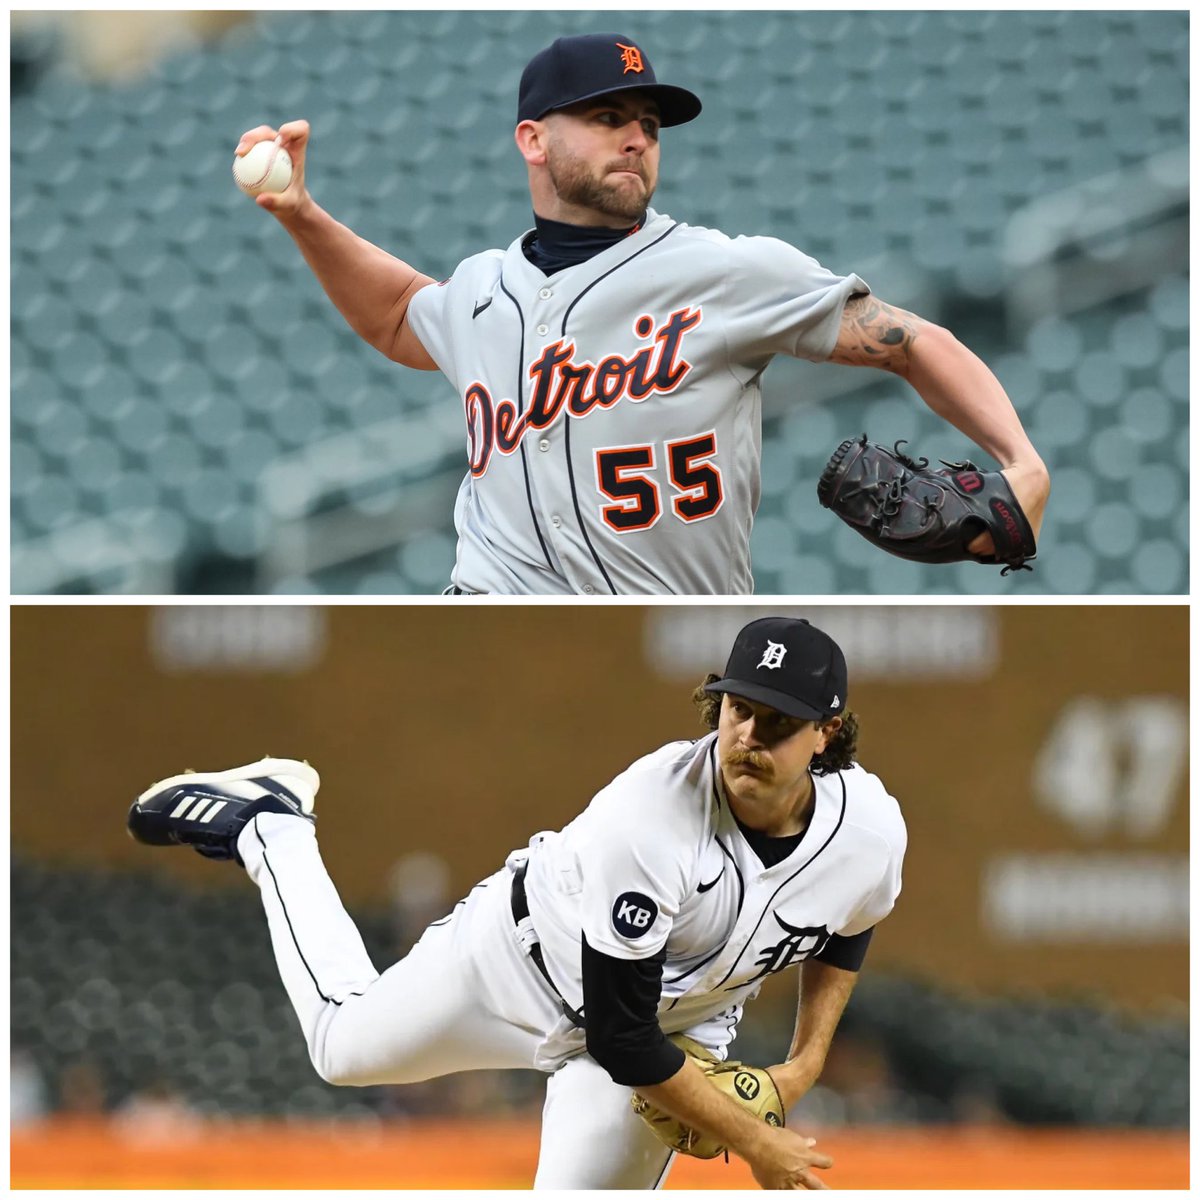 The Detroit Tigers have quite the duo at the back end of their bullpen:

Alex Lange: 1.64 ERA, 0.91 WHIP, 11 IP

Jason Foley: 2:00 ERA, 1.00 WHIP, 9 IP